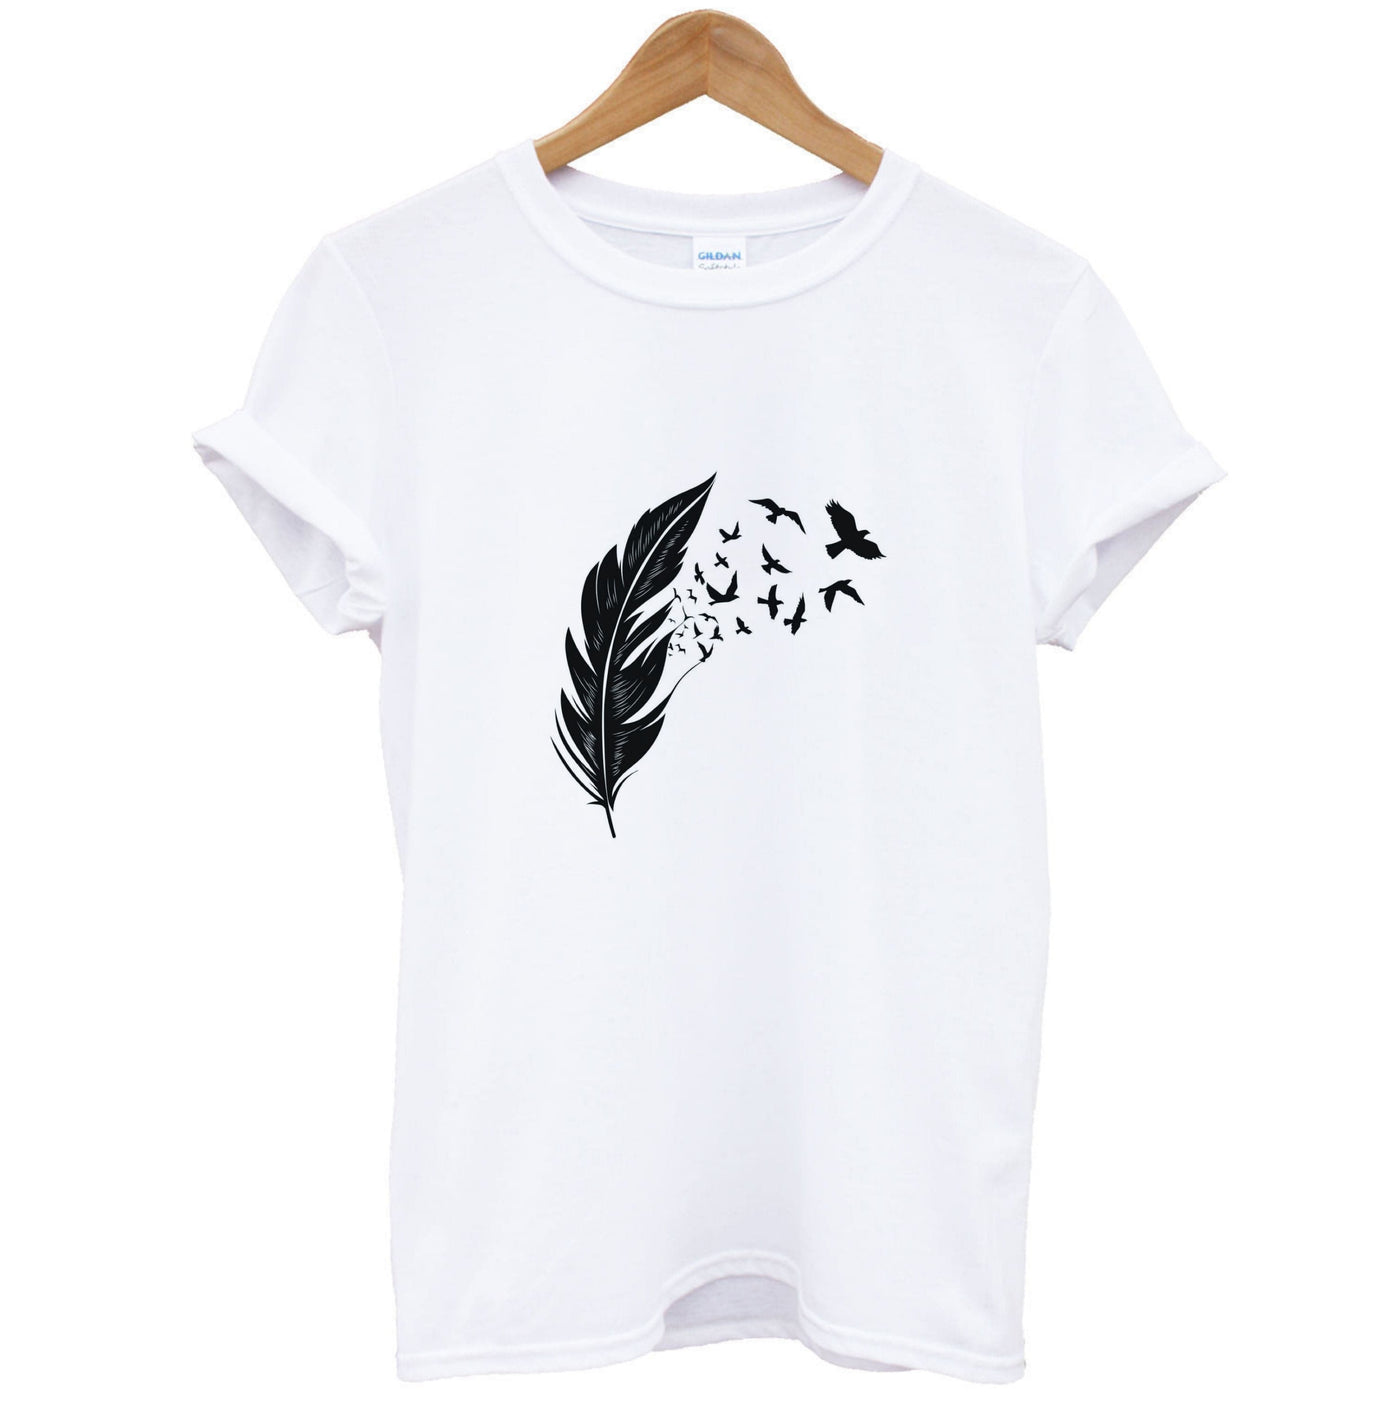 Birds From Feathers - The Originals T-Shirt